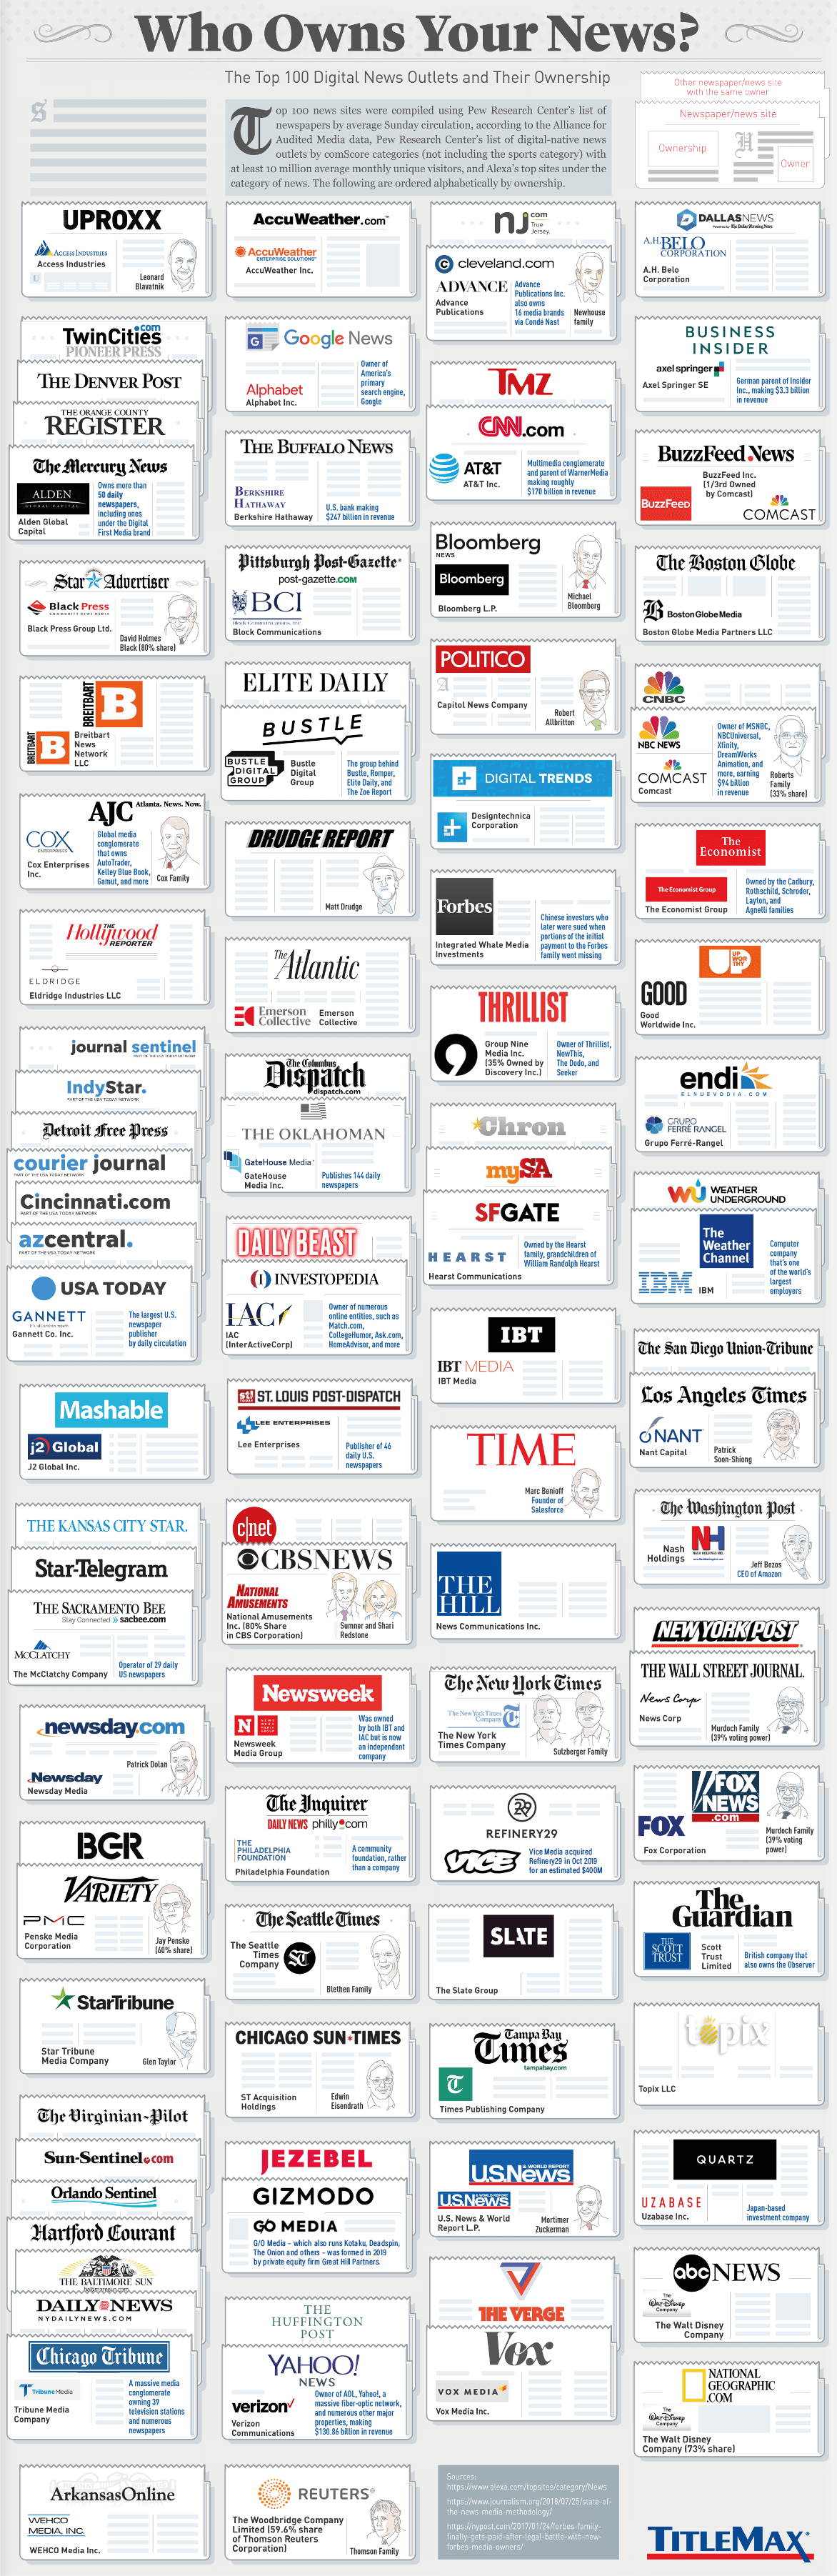 infographic media consolidation